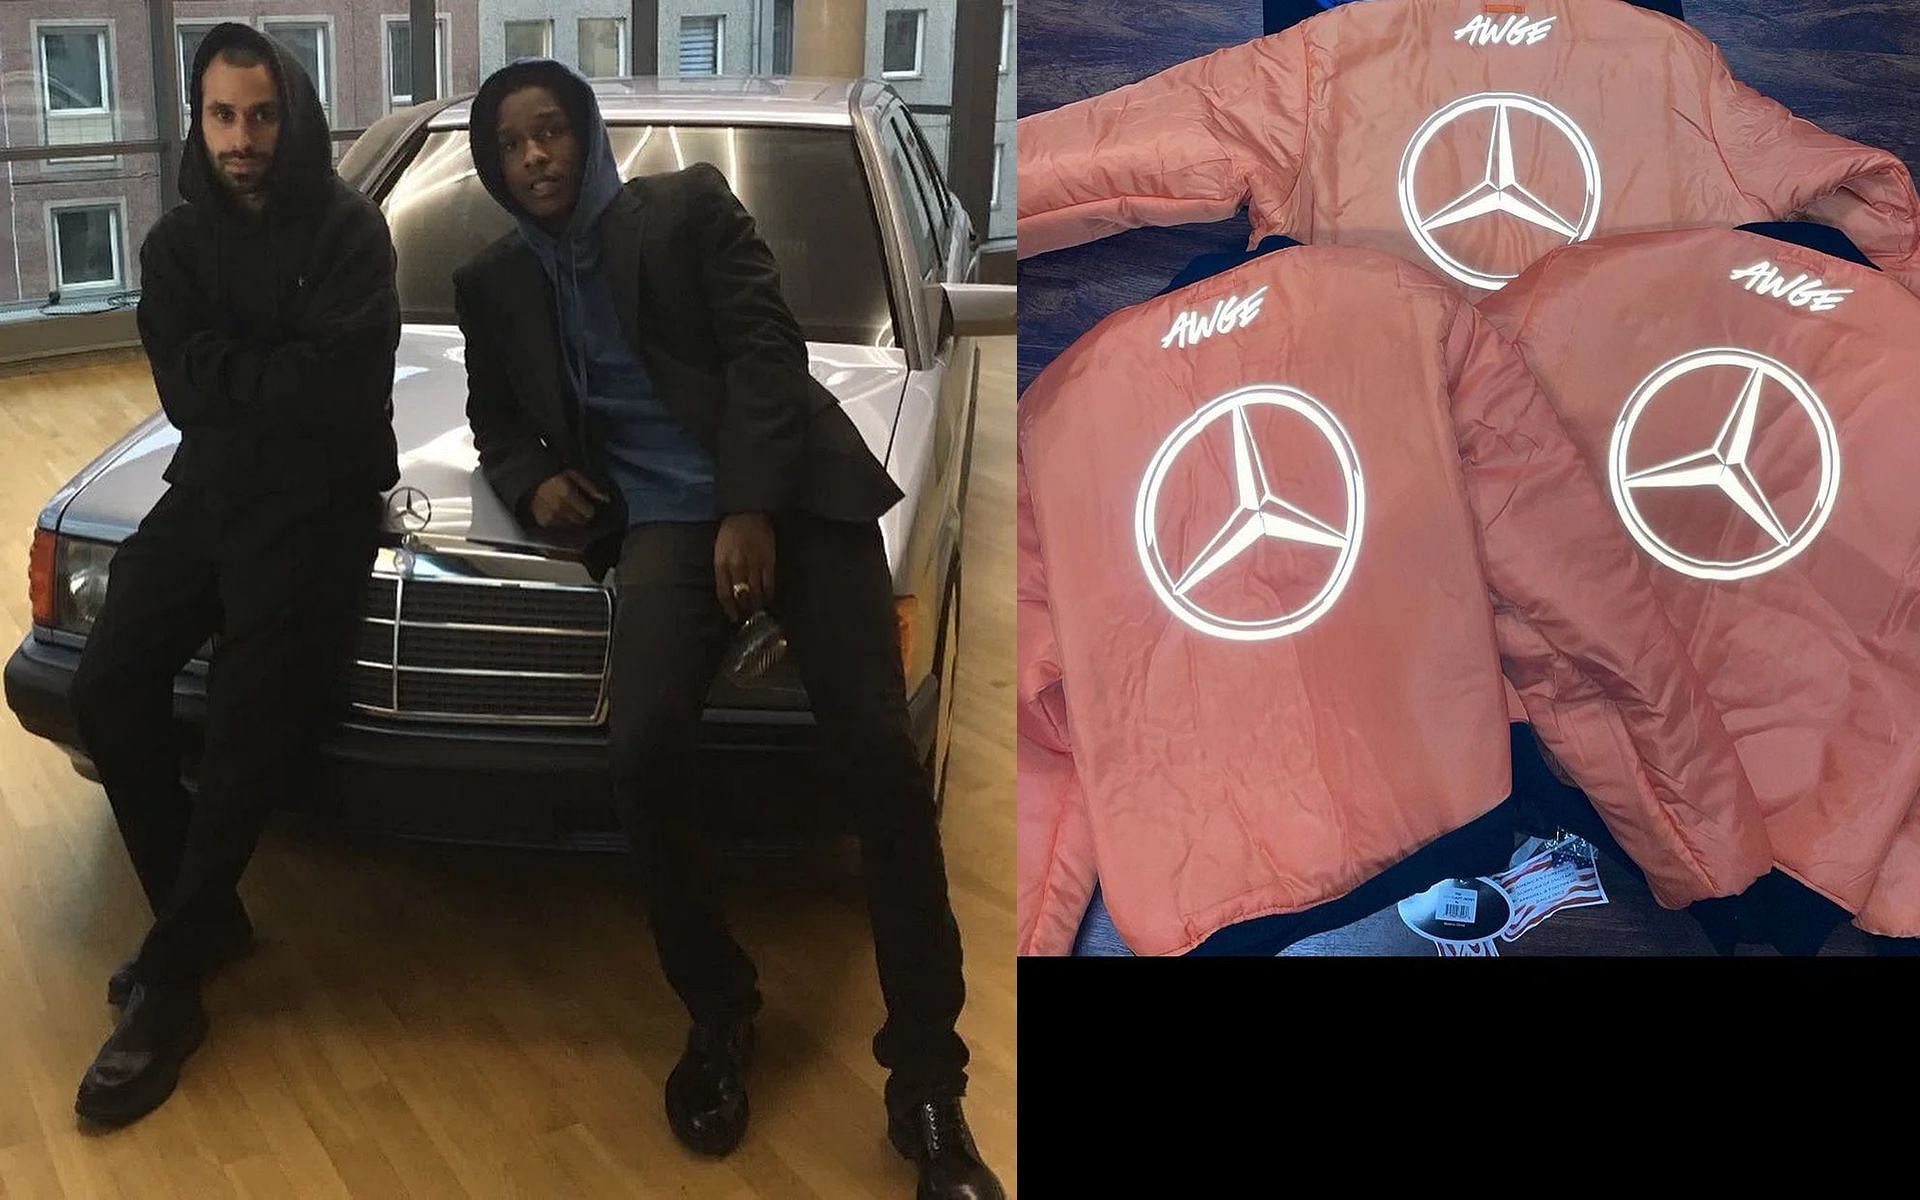 A$AP Rocky collaborated with Mercedes Benz for launching its upcoming collection (Image via Instagram/awgenization)